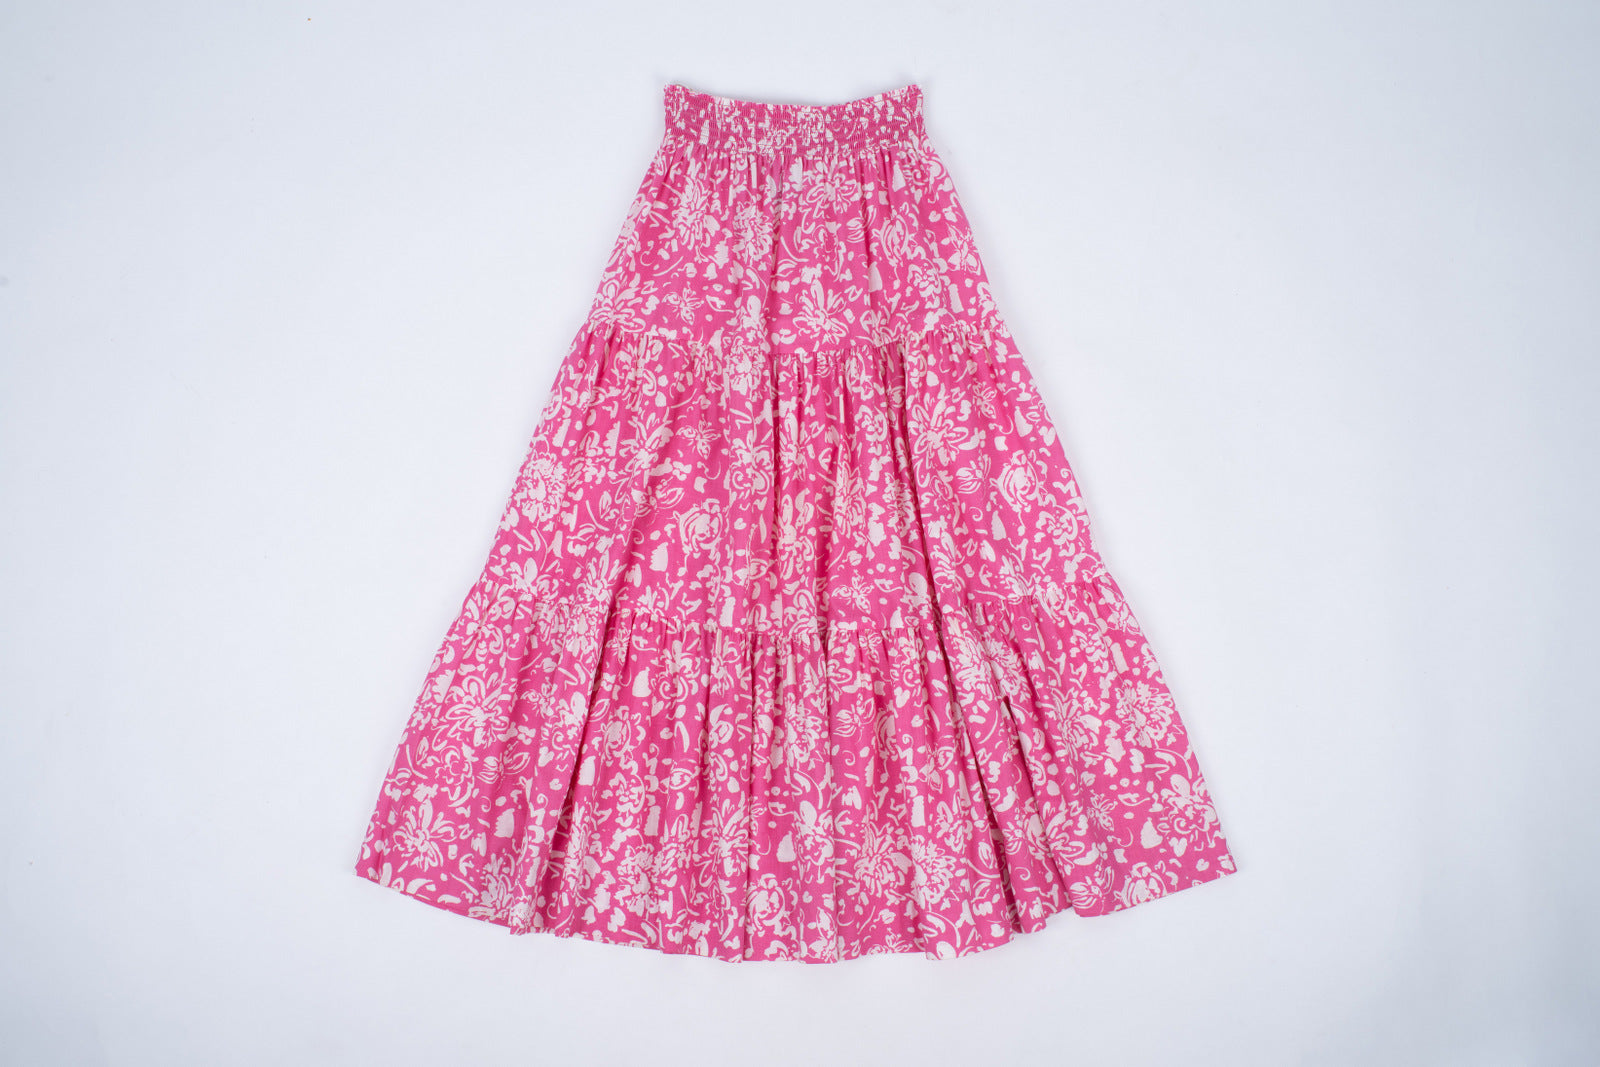 Laura Ashley Tiered Pink Long Prairie Skirt, Size S